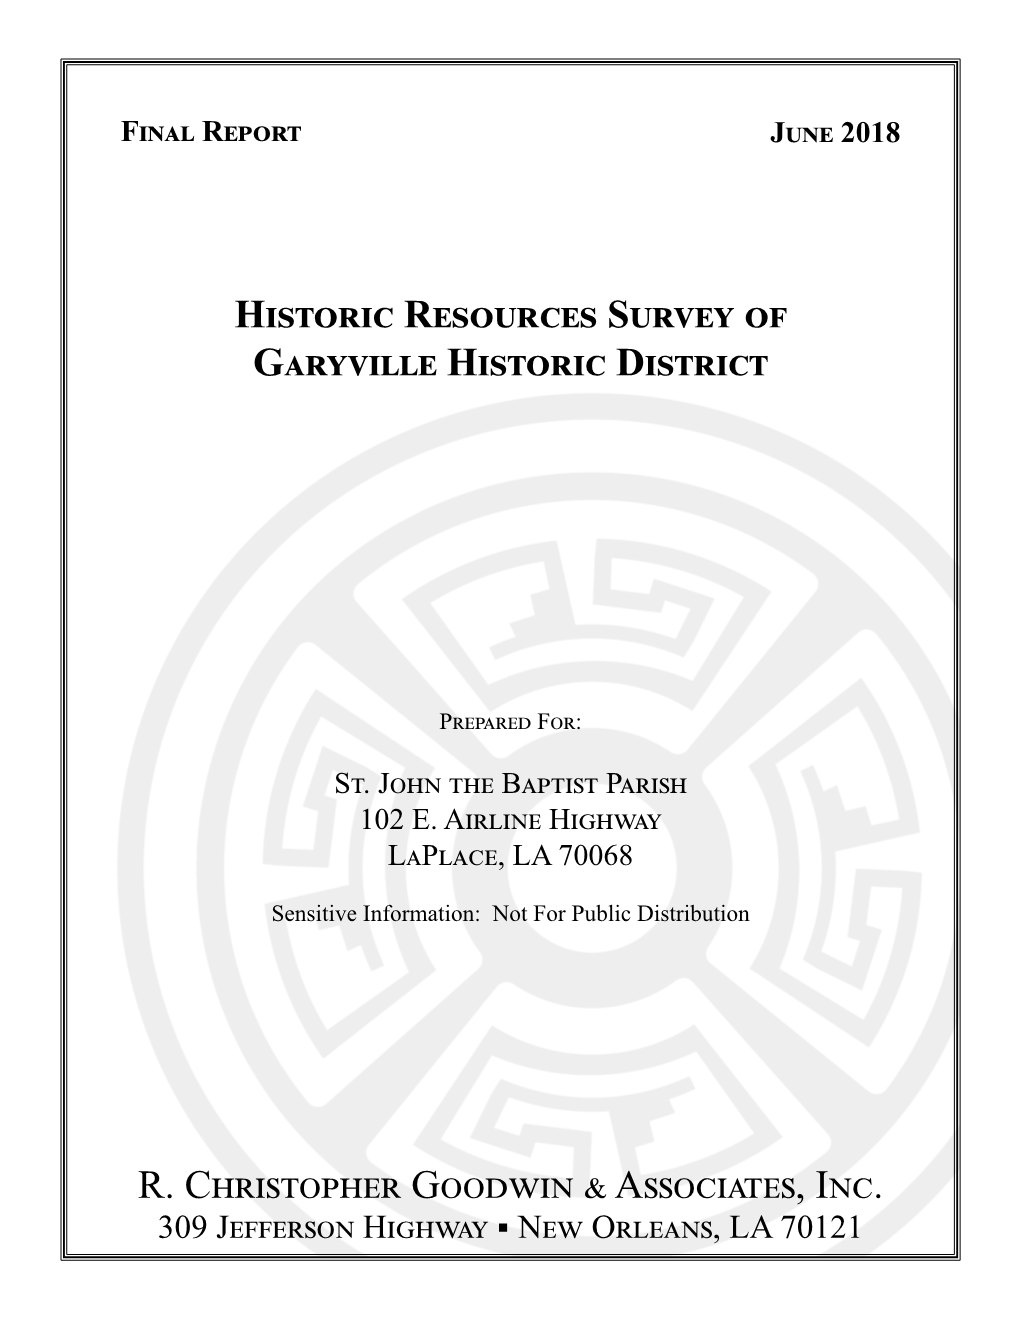 Historic Resources Survey of Garyville Historic District